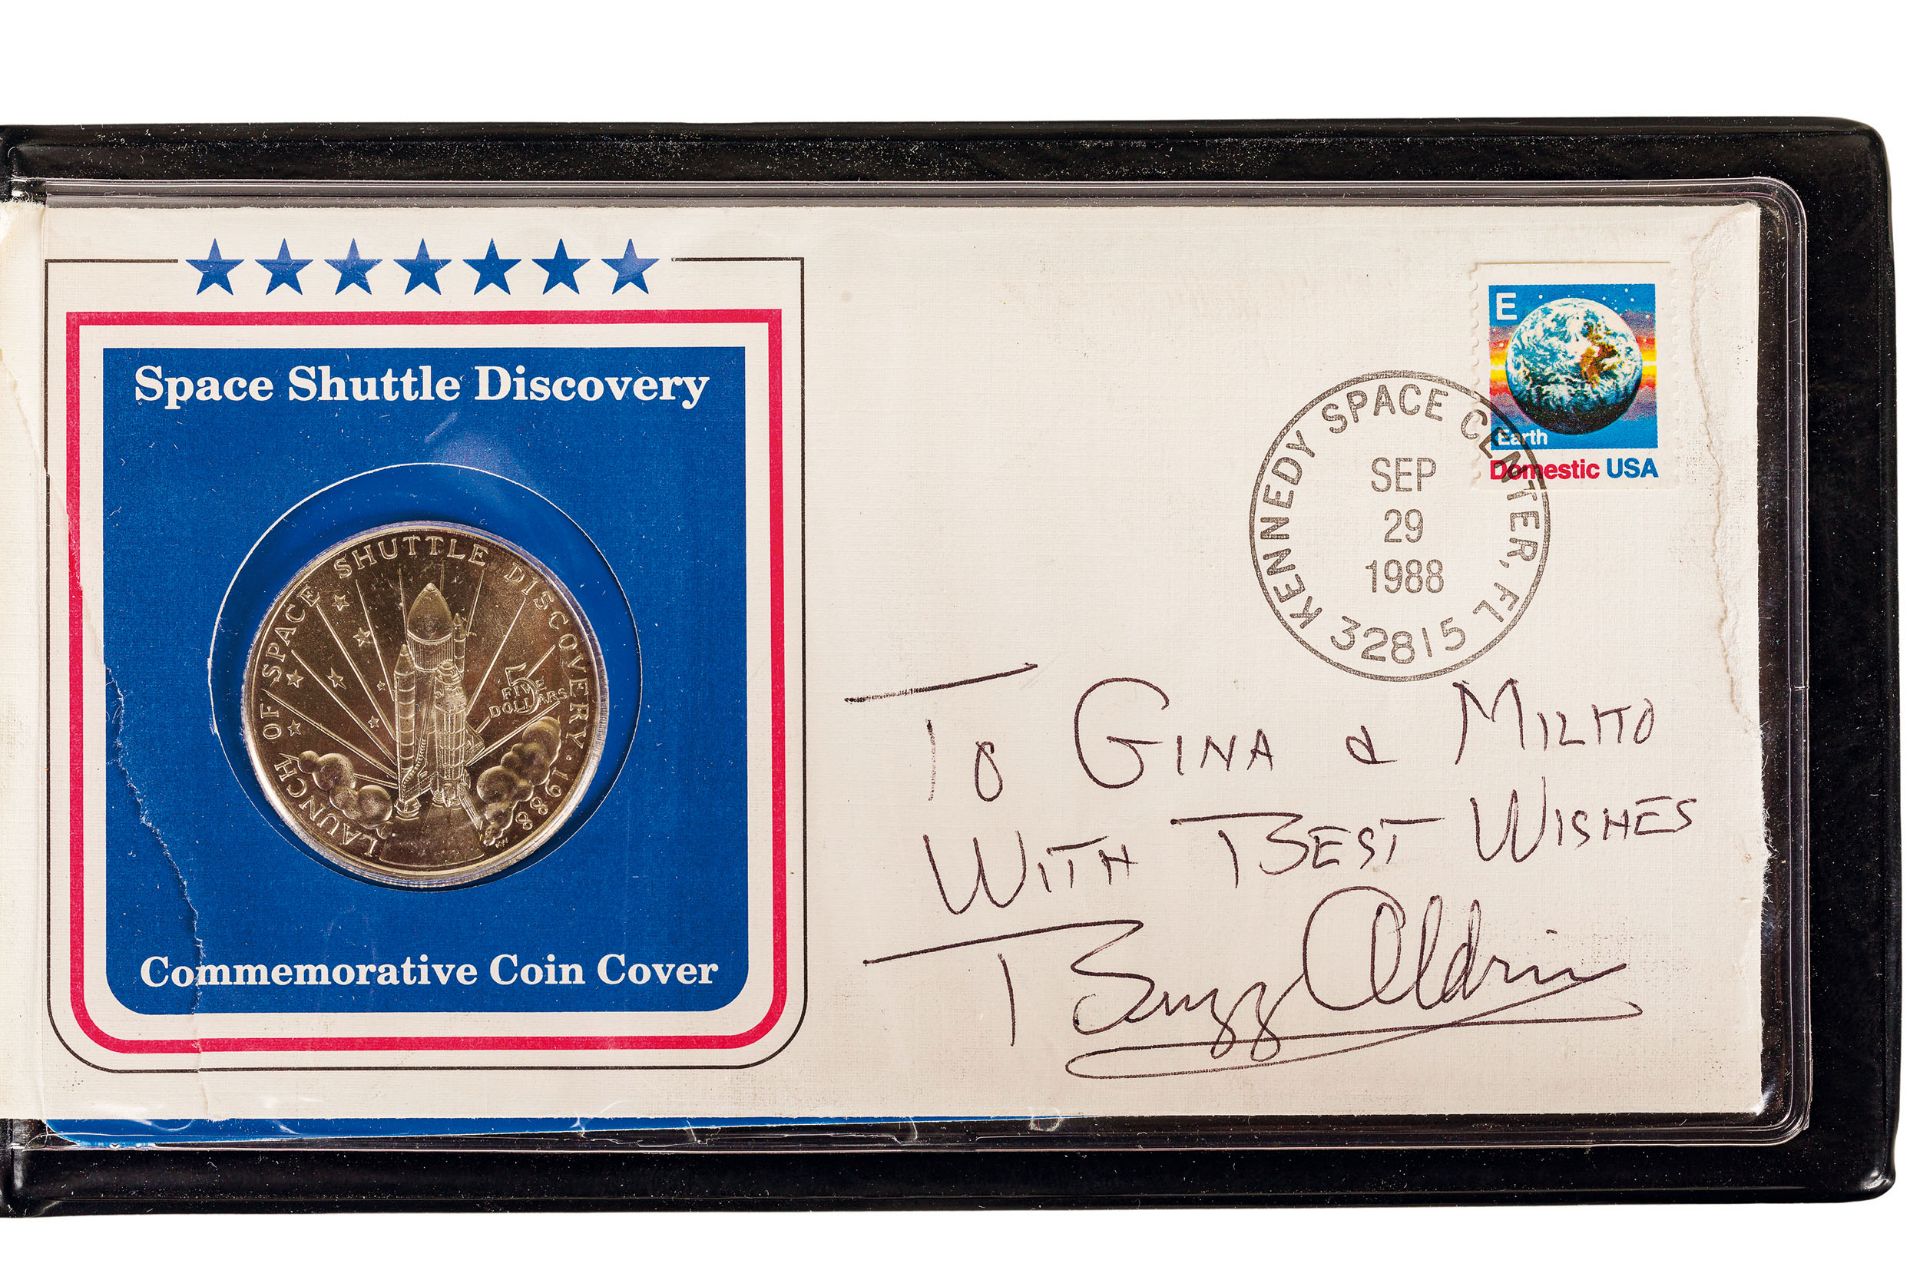 SPACE SHUTTLE DISCOVERY COMMEMORATIVE COIN COVER, KENNEDY SPACE CENTER, 1988 - Bild 3 aus 5